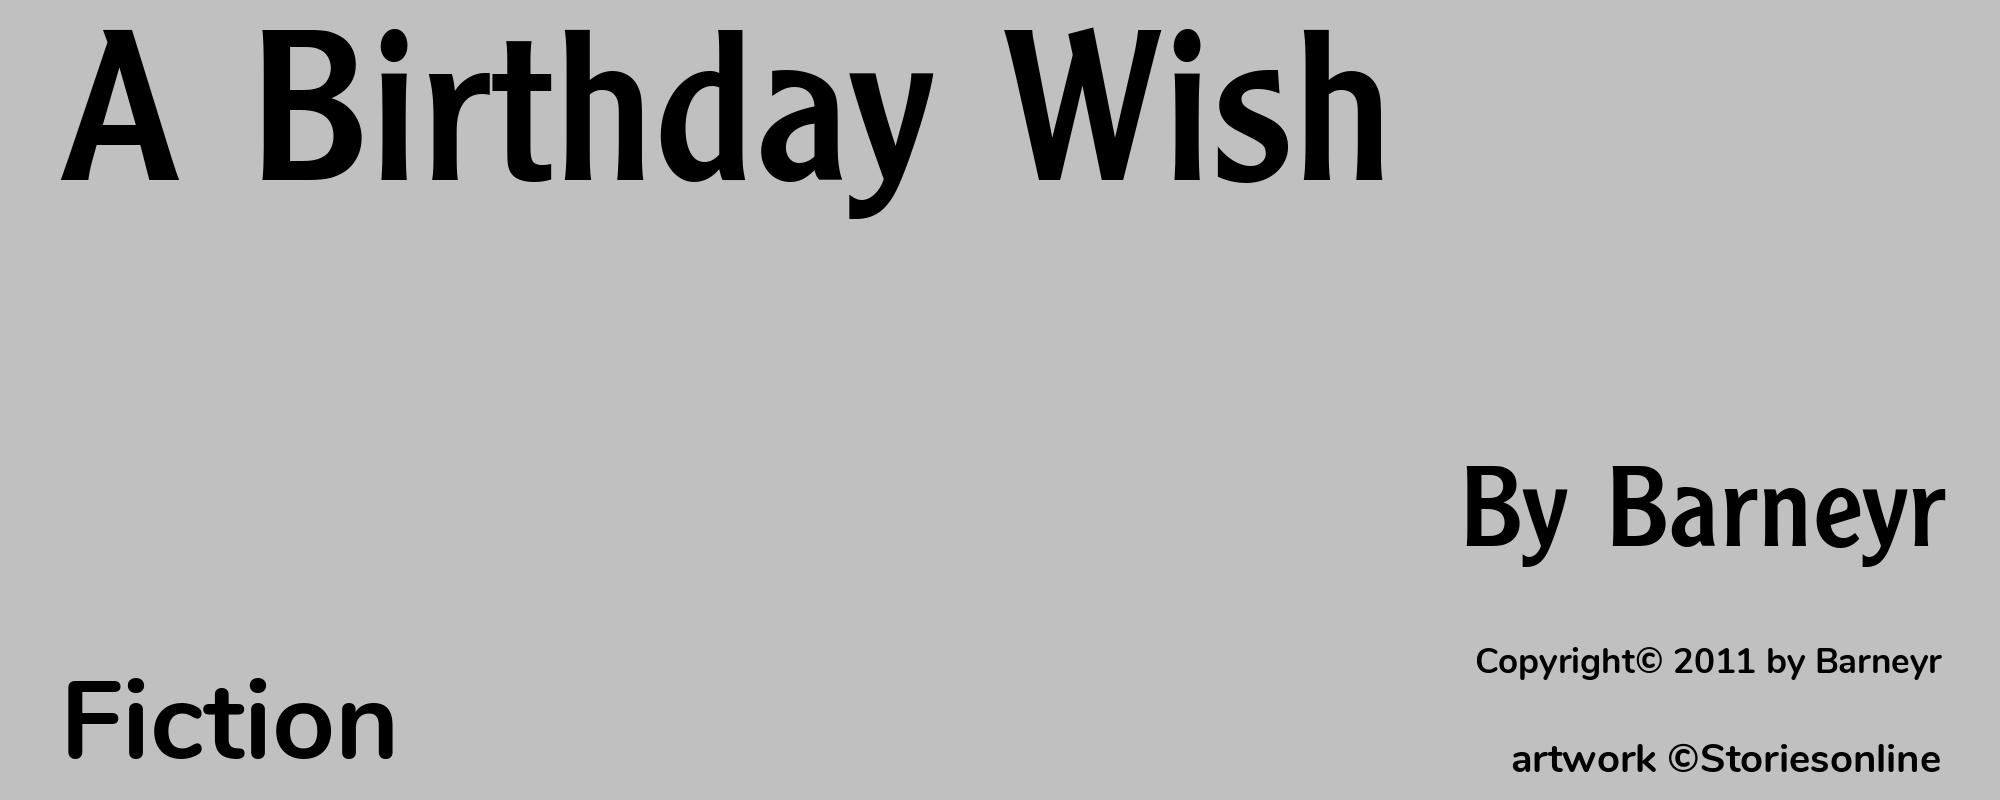 A Birthday Wish - Cover